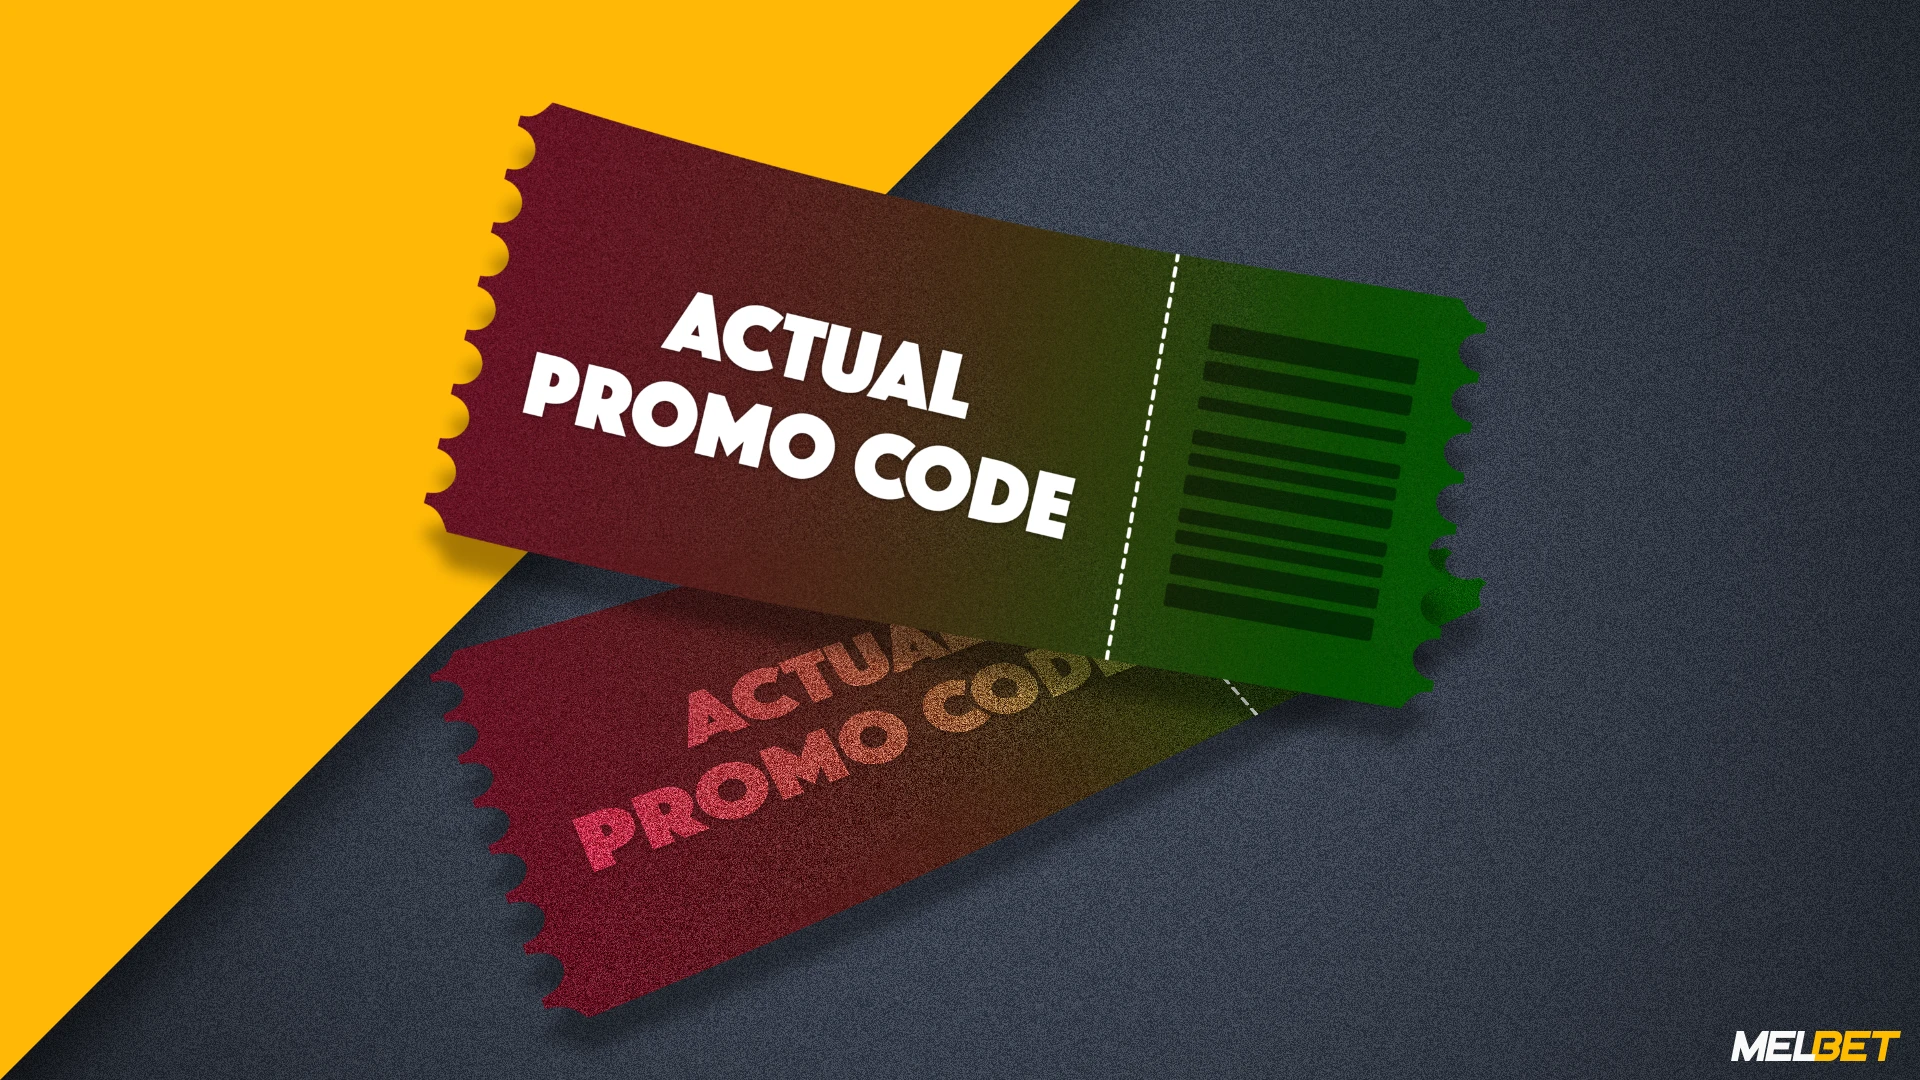 Only actual Melbet promo codes allow players from Bangladesh to get an extra bonus